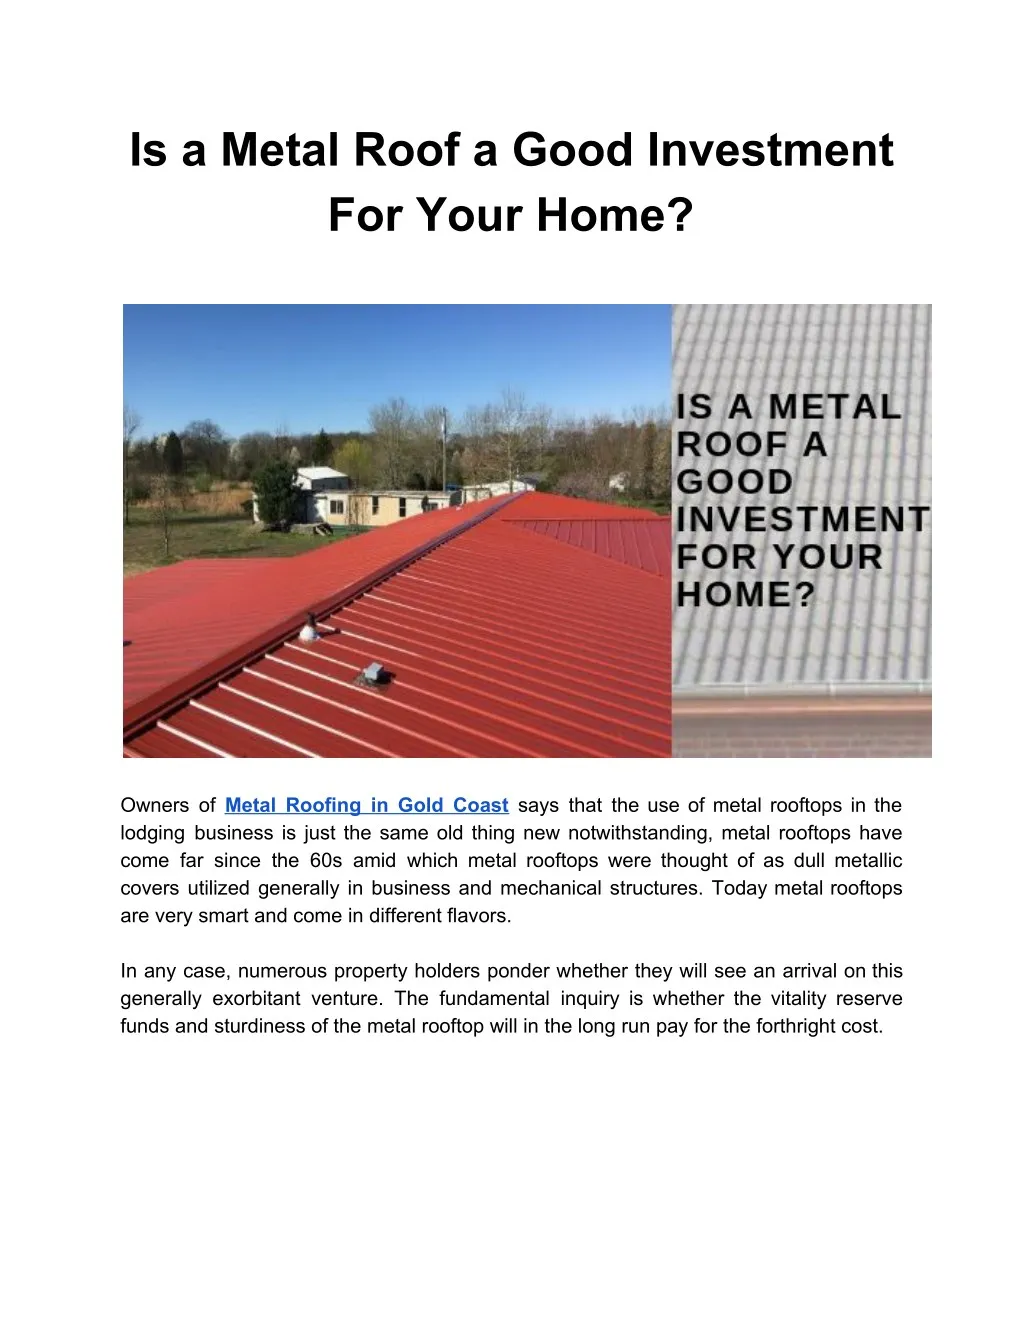 is a metal roof a good investment for your home